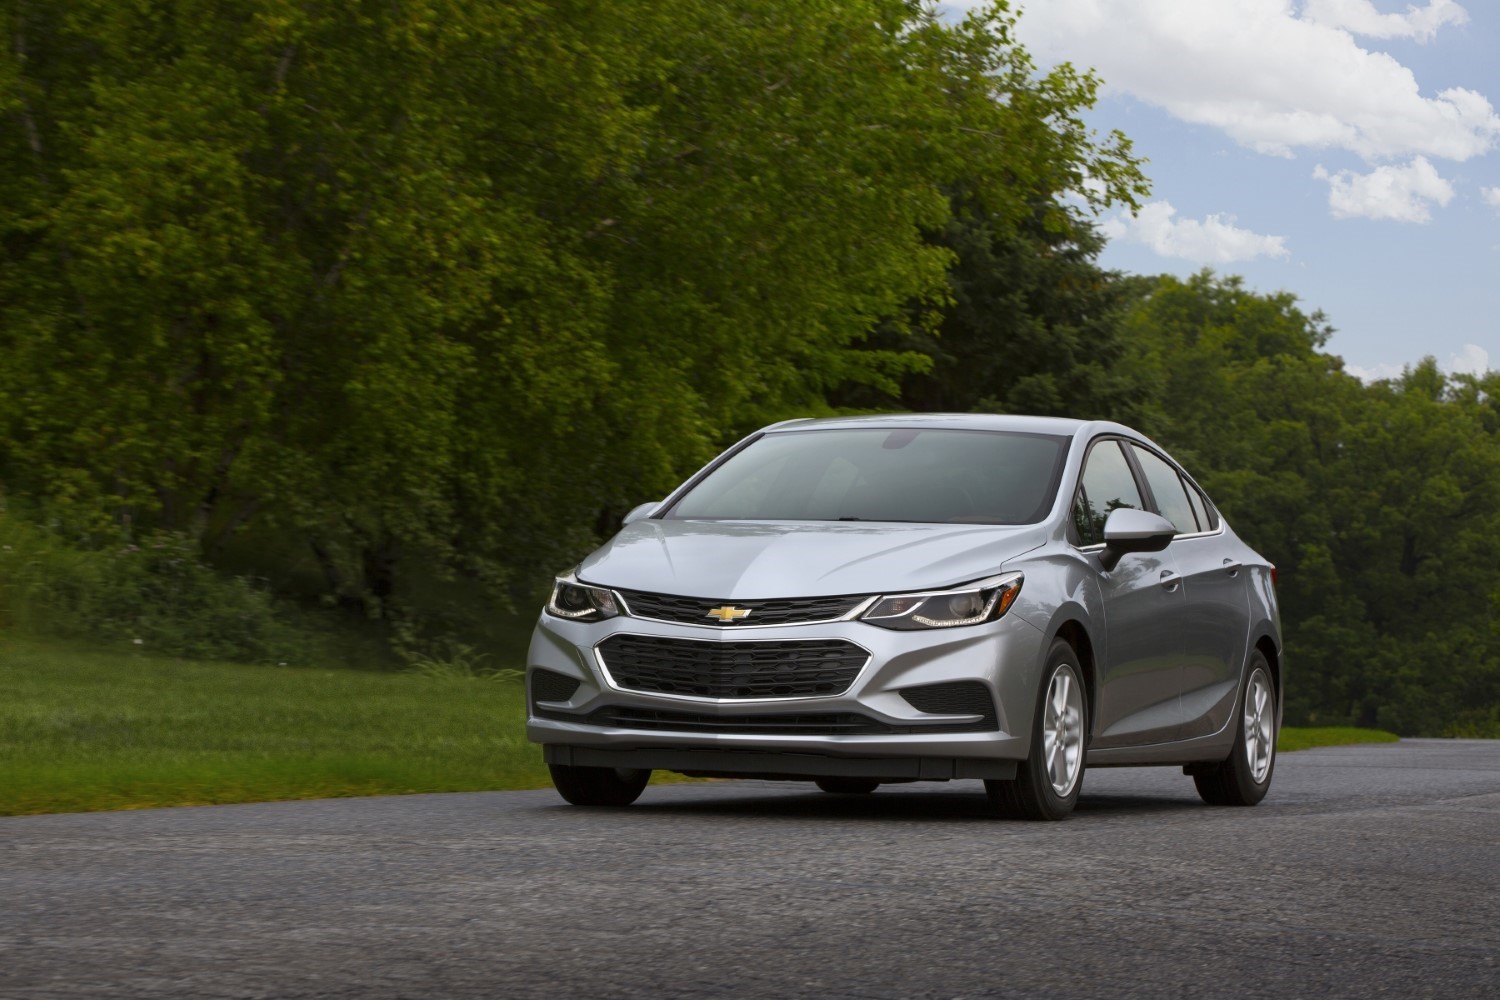 2017 Chevrolet Cruze Sedan Specs, Review, and Pricing | CarSession